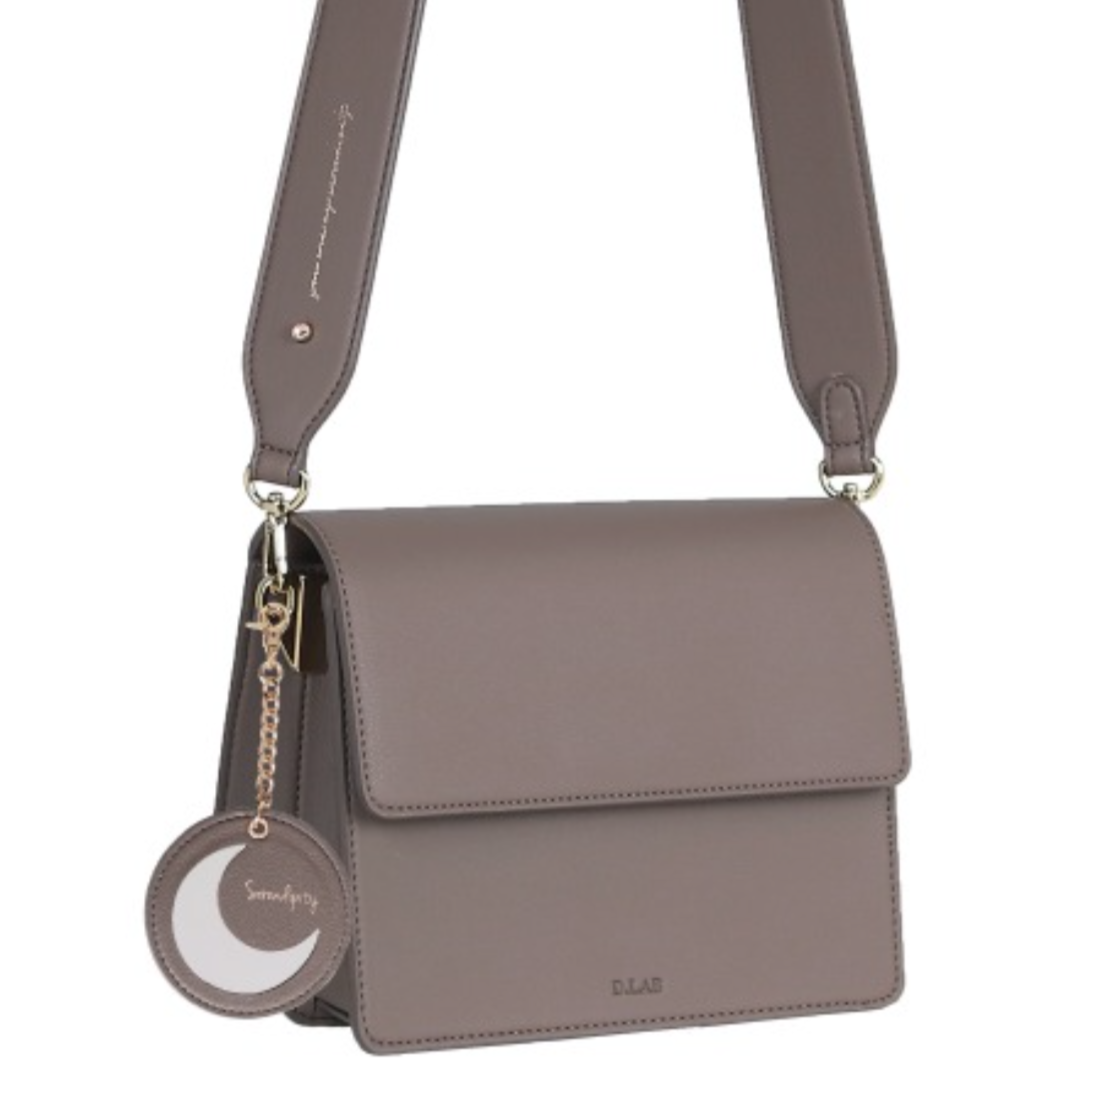 D.LAB May Bag Taupe